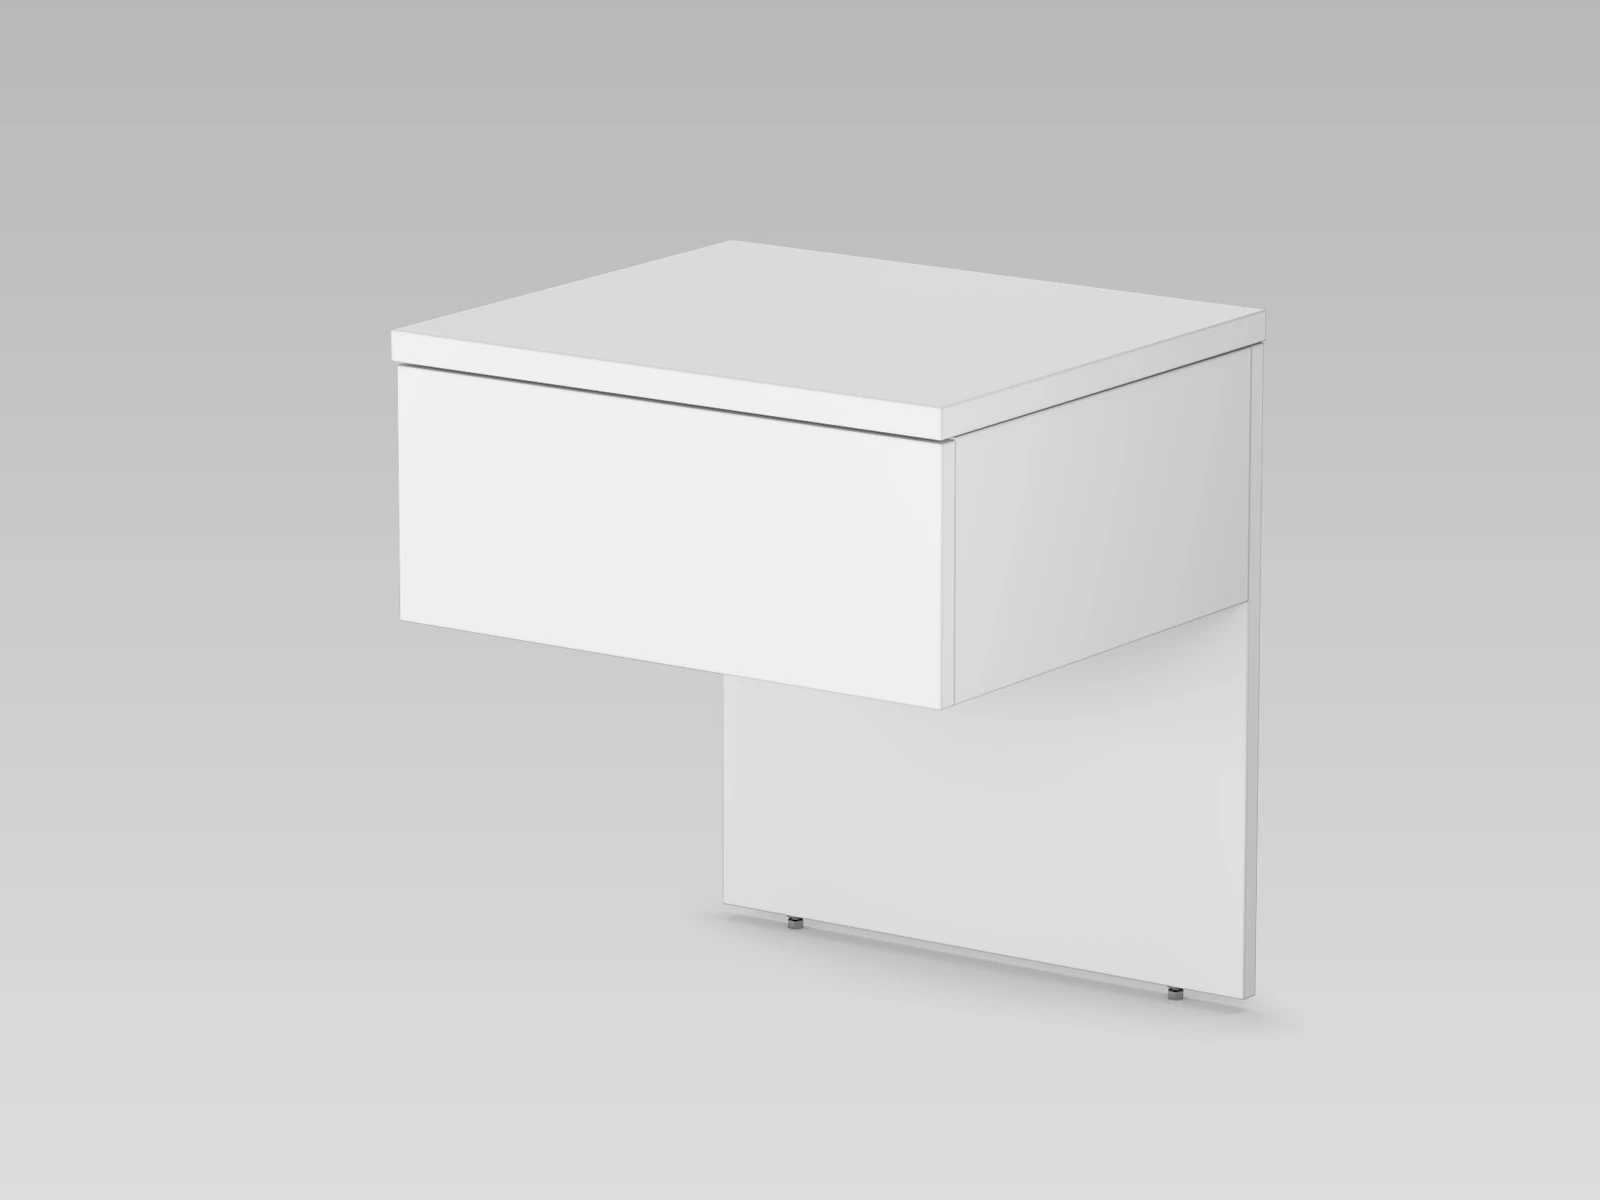 2 Bedside table Classic White